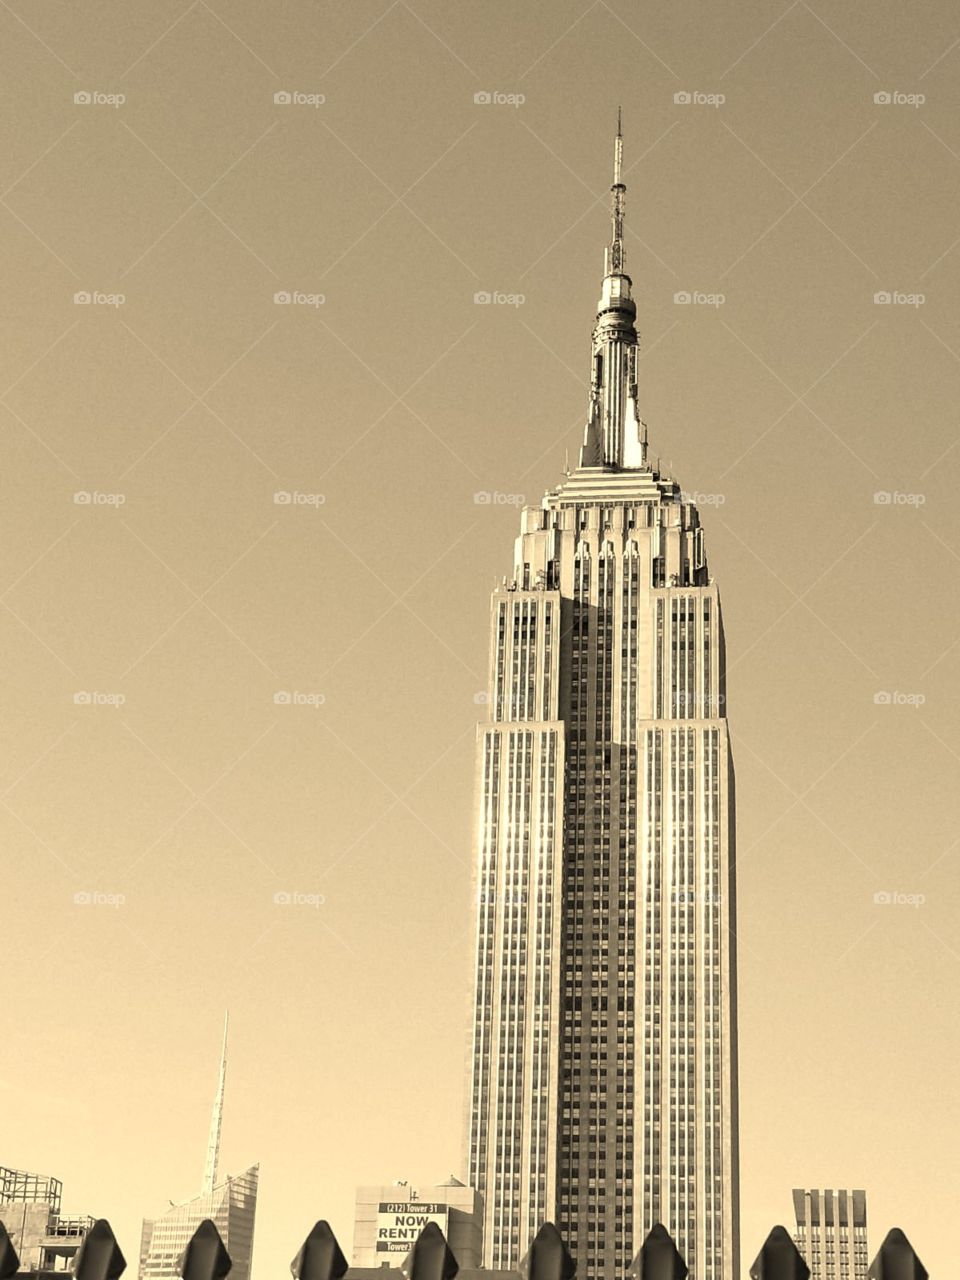 Rooftop View of Empire State Building. Sepia Filter. May 2017.